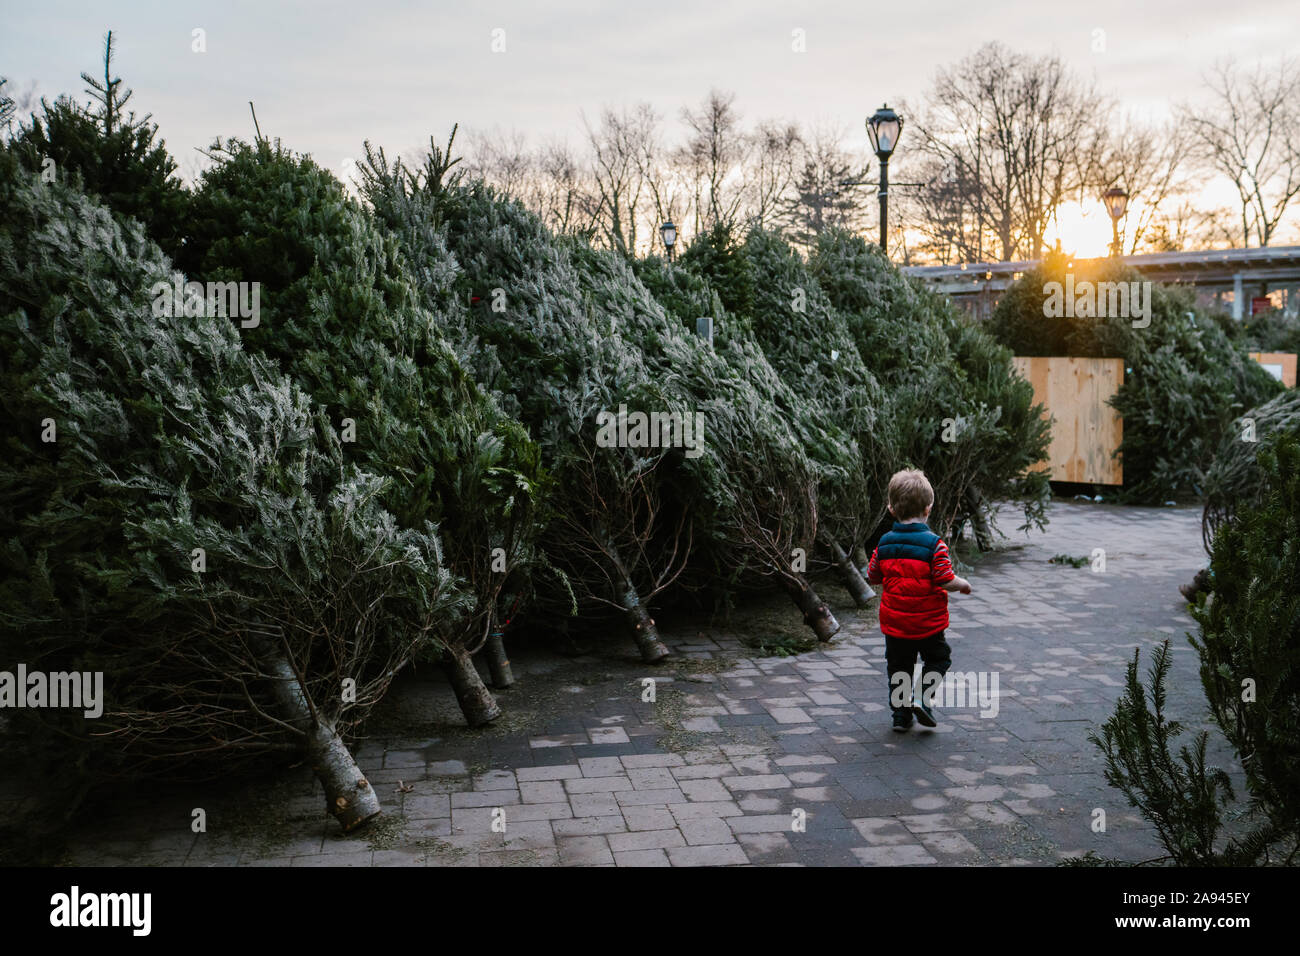 A boy walks by a row of Christmas trees. Stock Photo